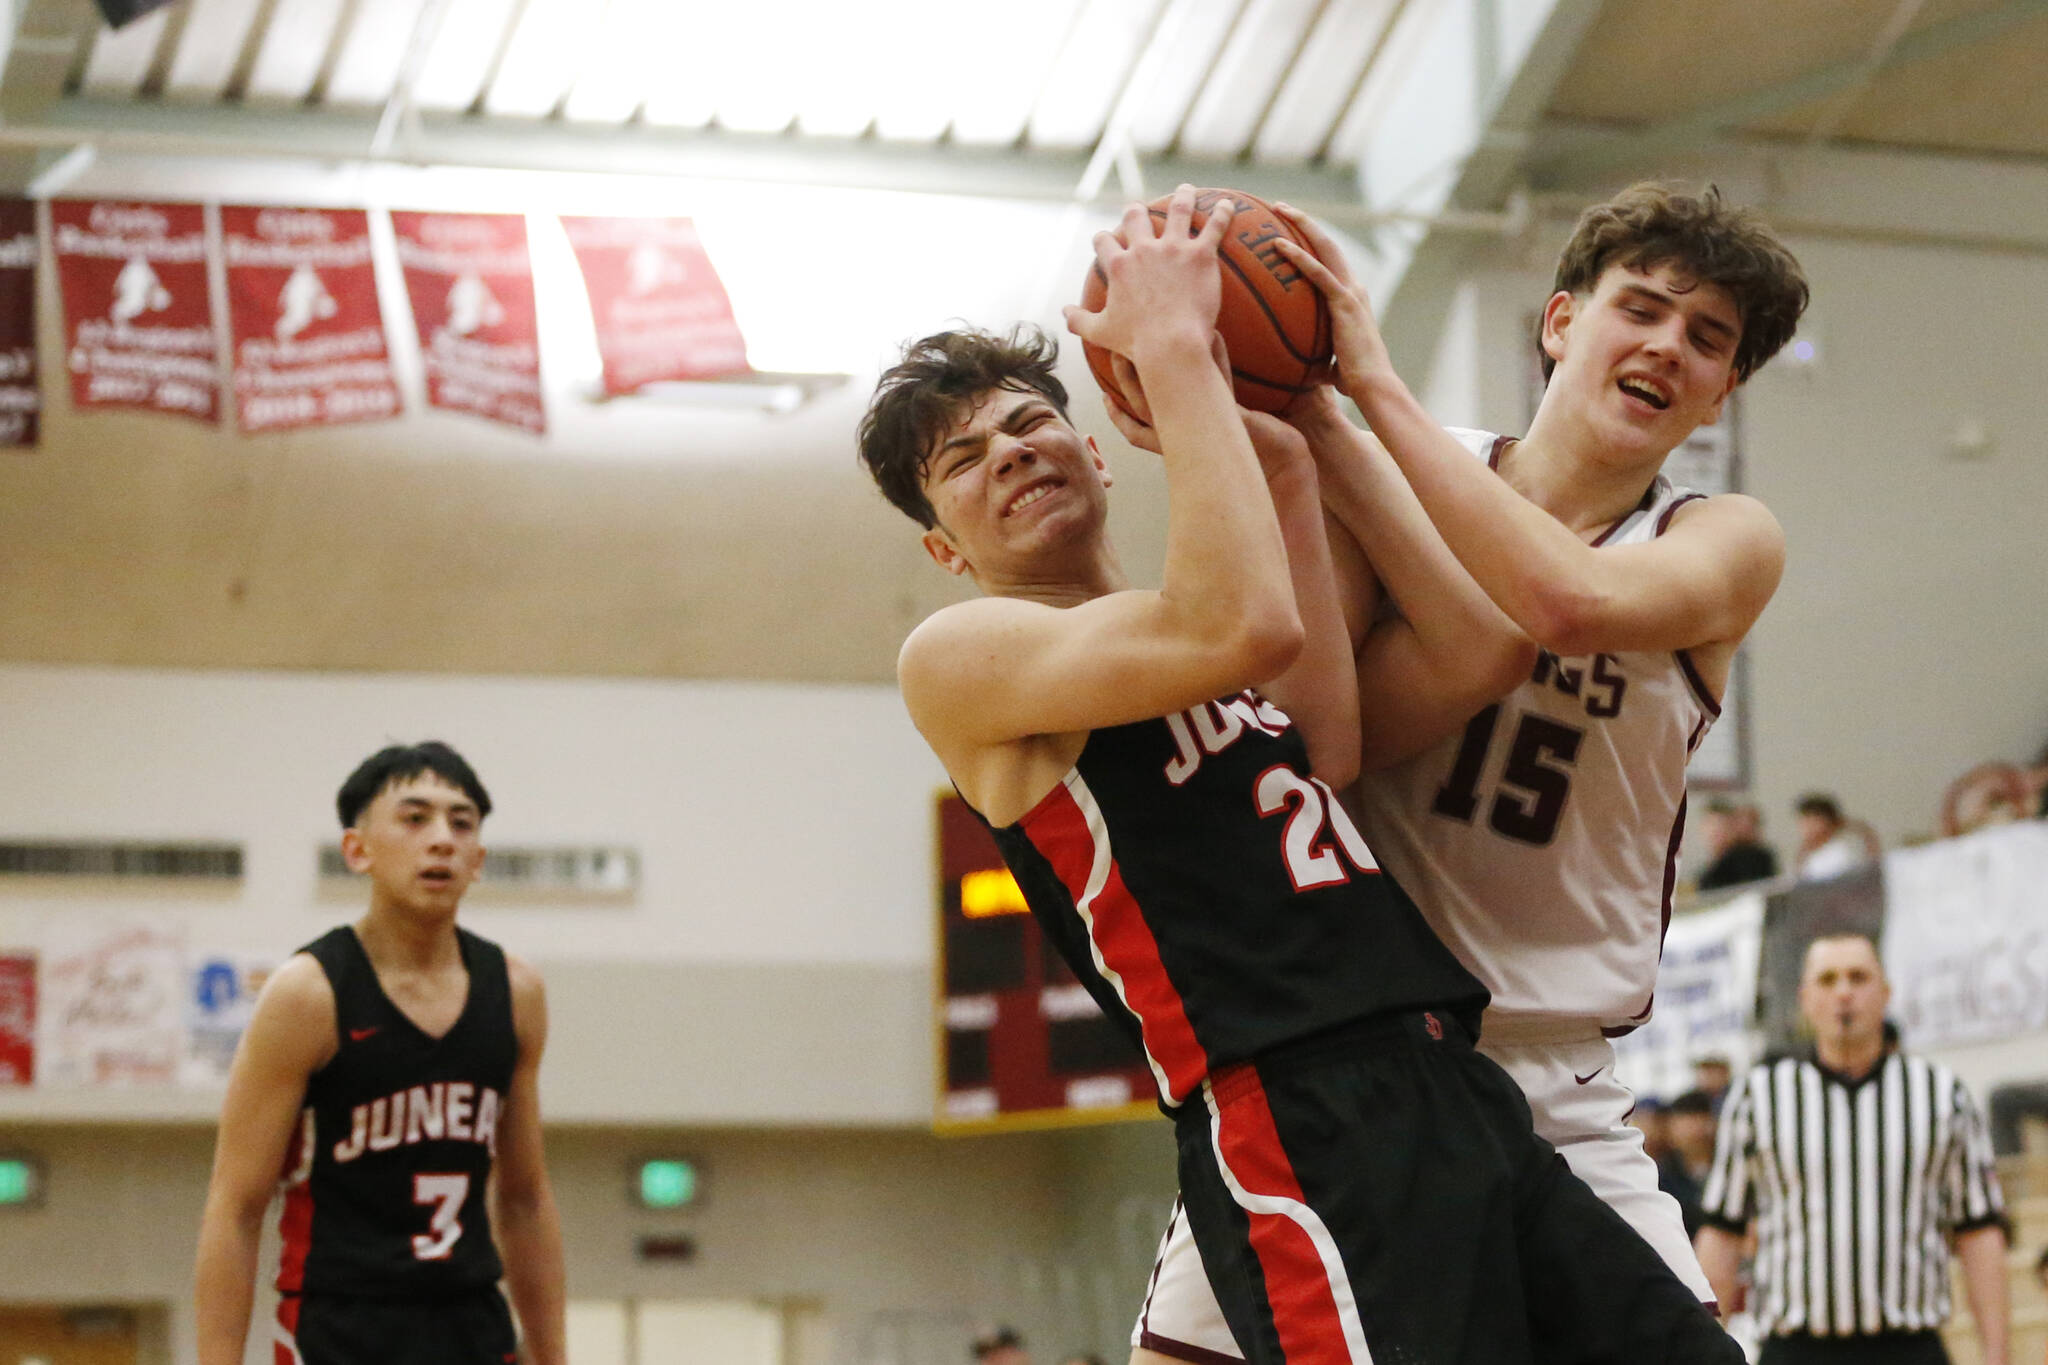 Juneau’s Orion Dybdahl (20) forces a jump ball with Kayhi’s Jared Rhoads (15) during Juneau’s 71-52 loss to Kayhi on Friday at the Clarke Cochrane Gymnasium. (Christopher Mullen / Ketchikan Daily News)